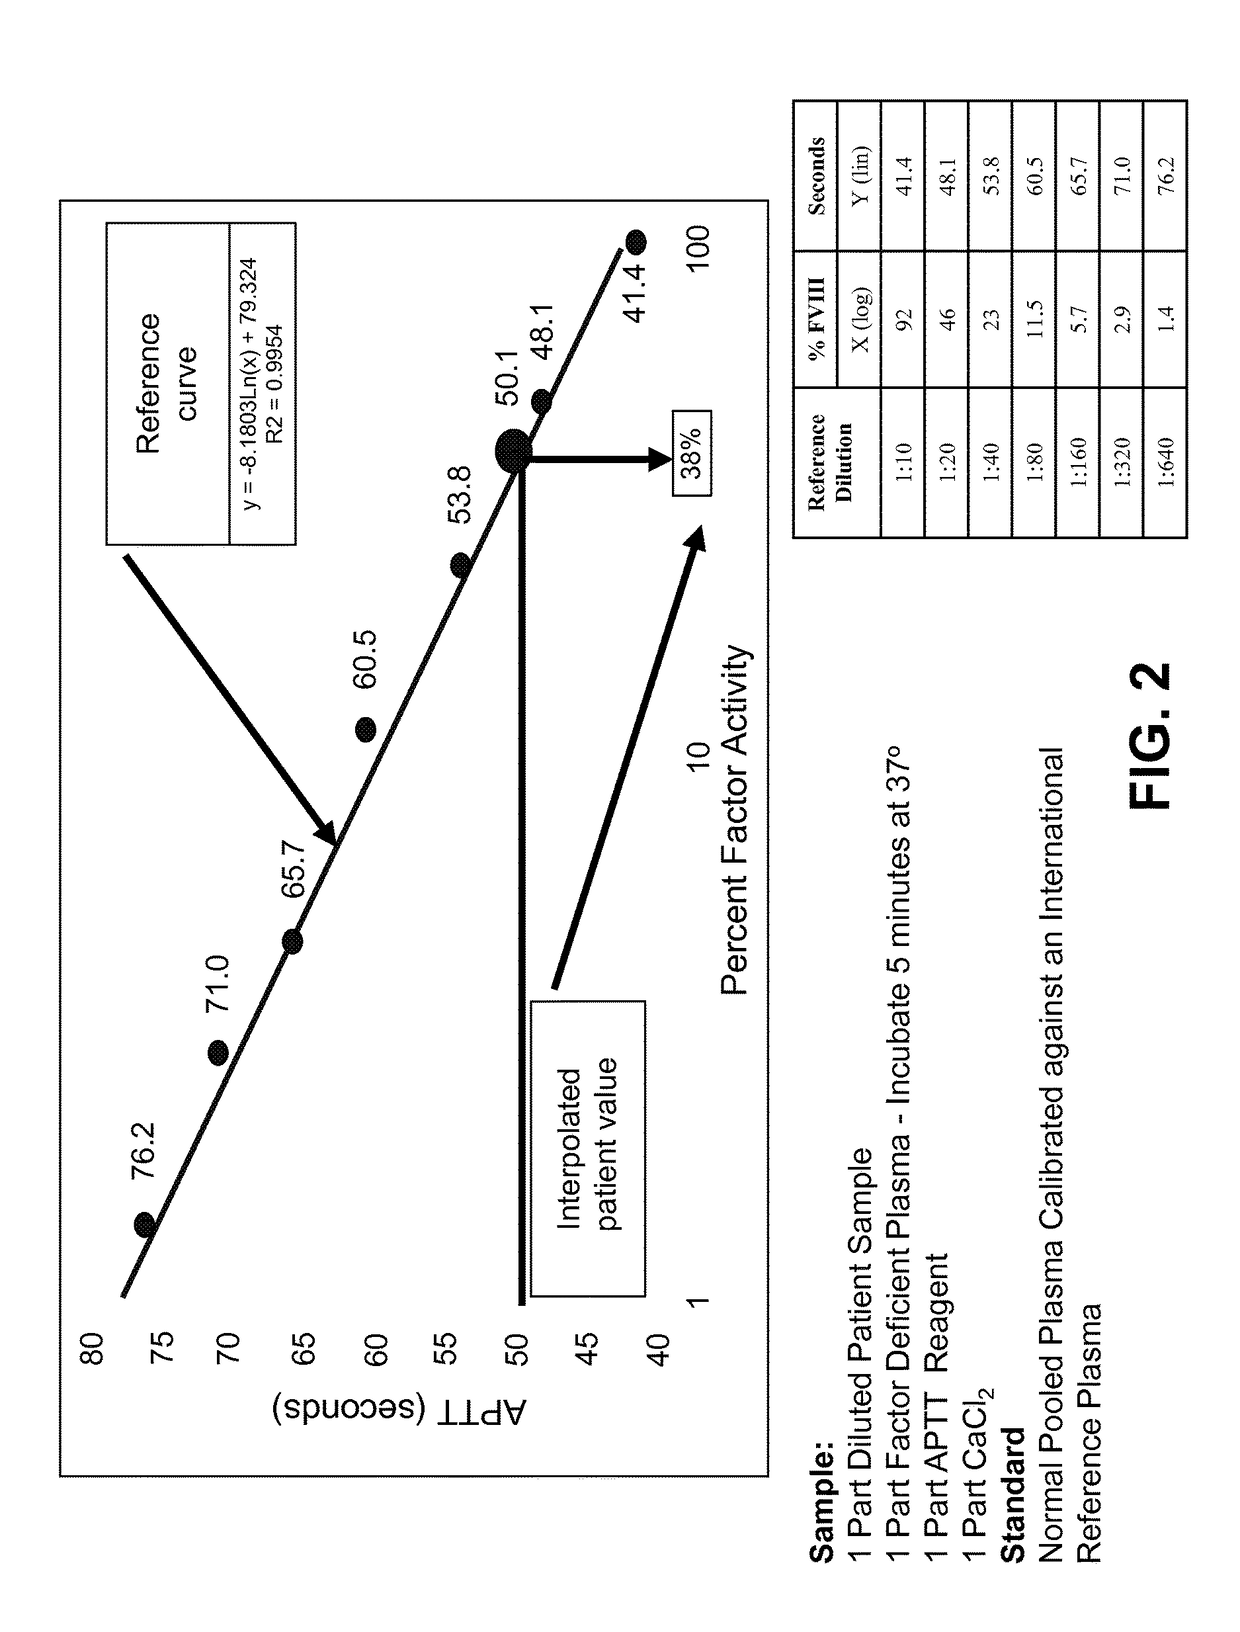 Blood factor monitoring assay and uses thereof